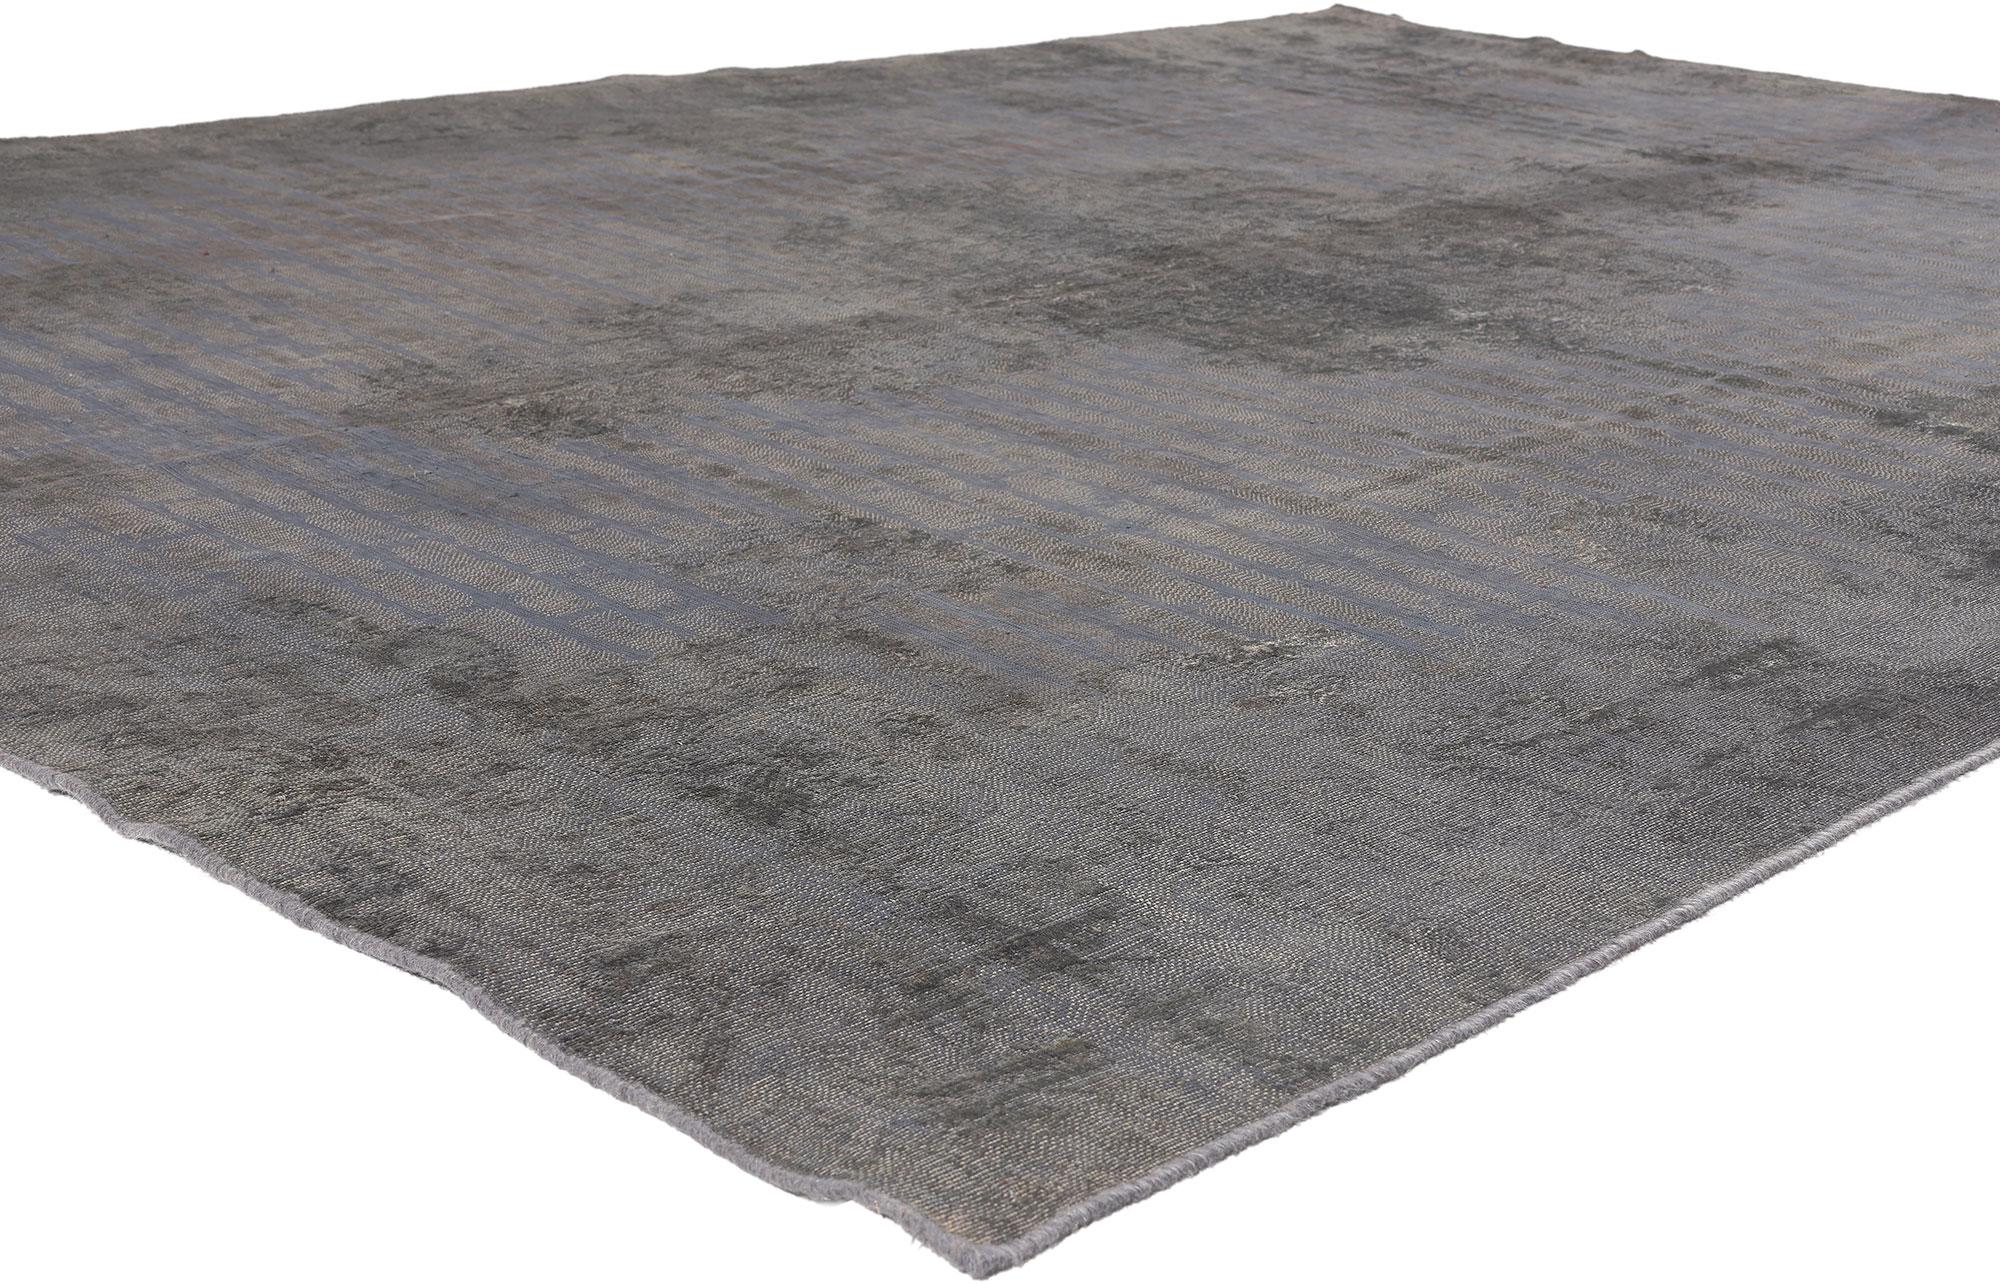 60601 Vintage Turkish Overdyed Rug, 07'03 x 10'03. 
French Industrial meets laid-back luxury in this vintage Turkish overdyed rug. The nostalgic brick design and monochromatic earthy hues in this piece work together creating a cohesive flow. The